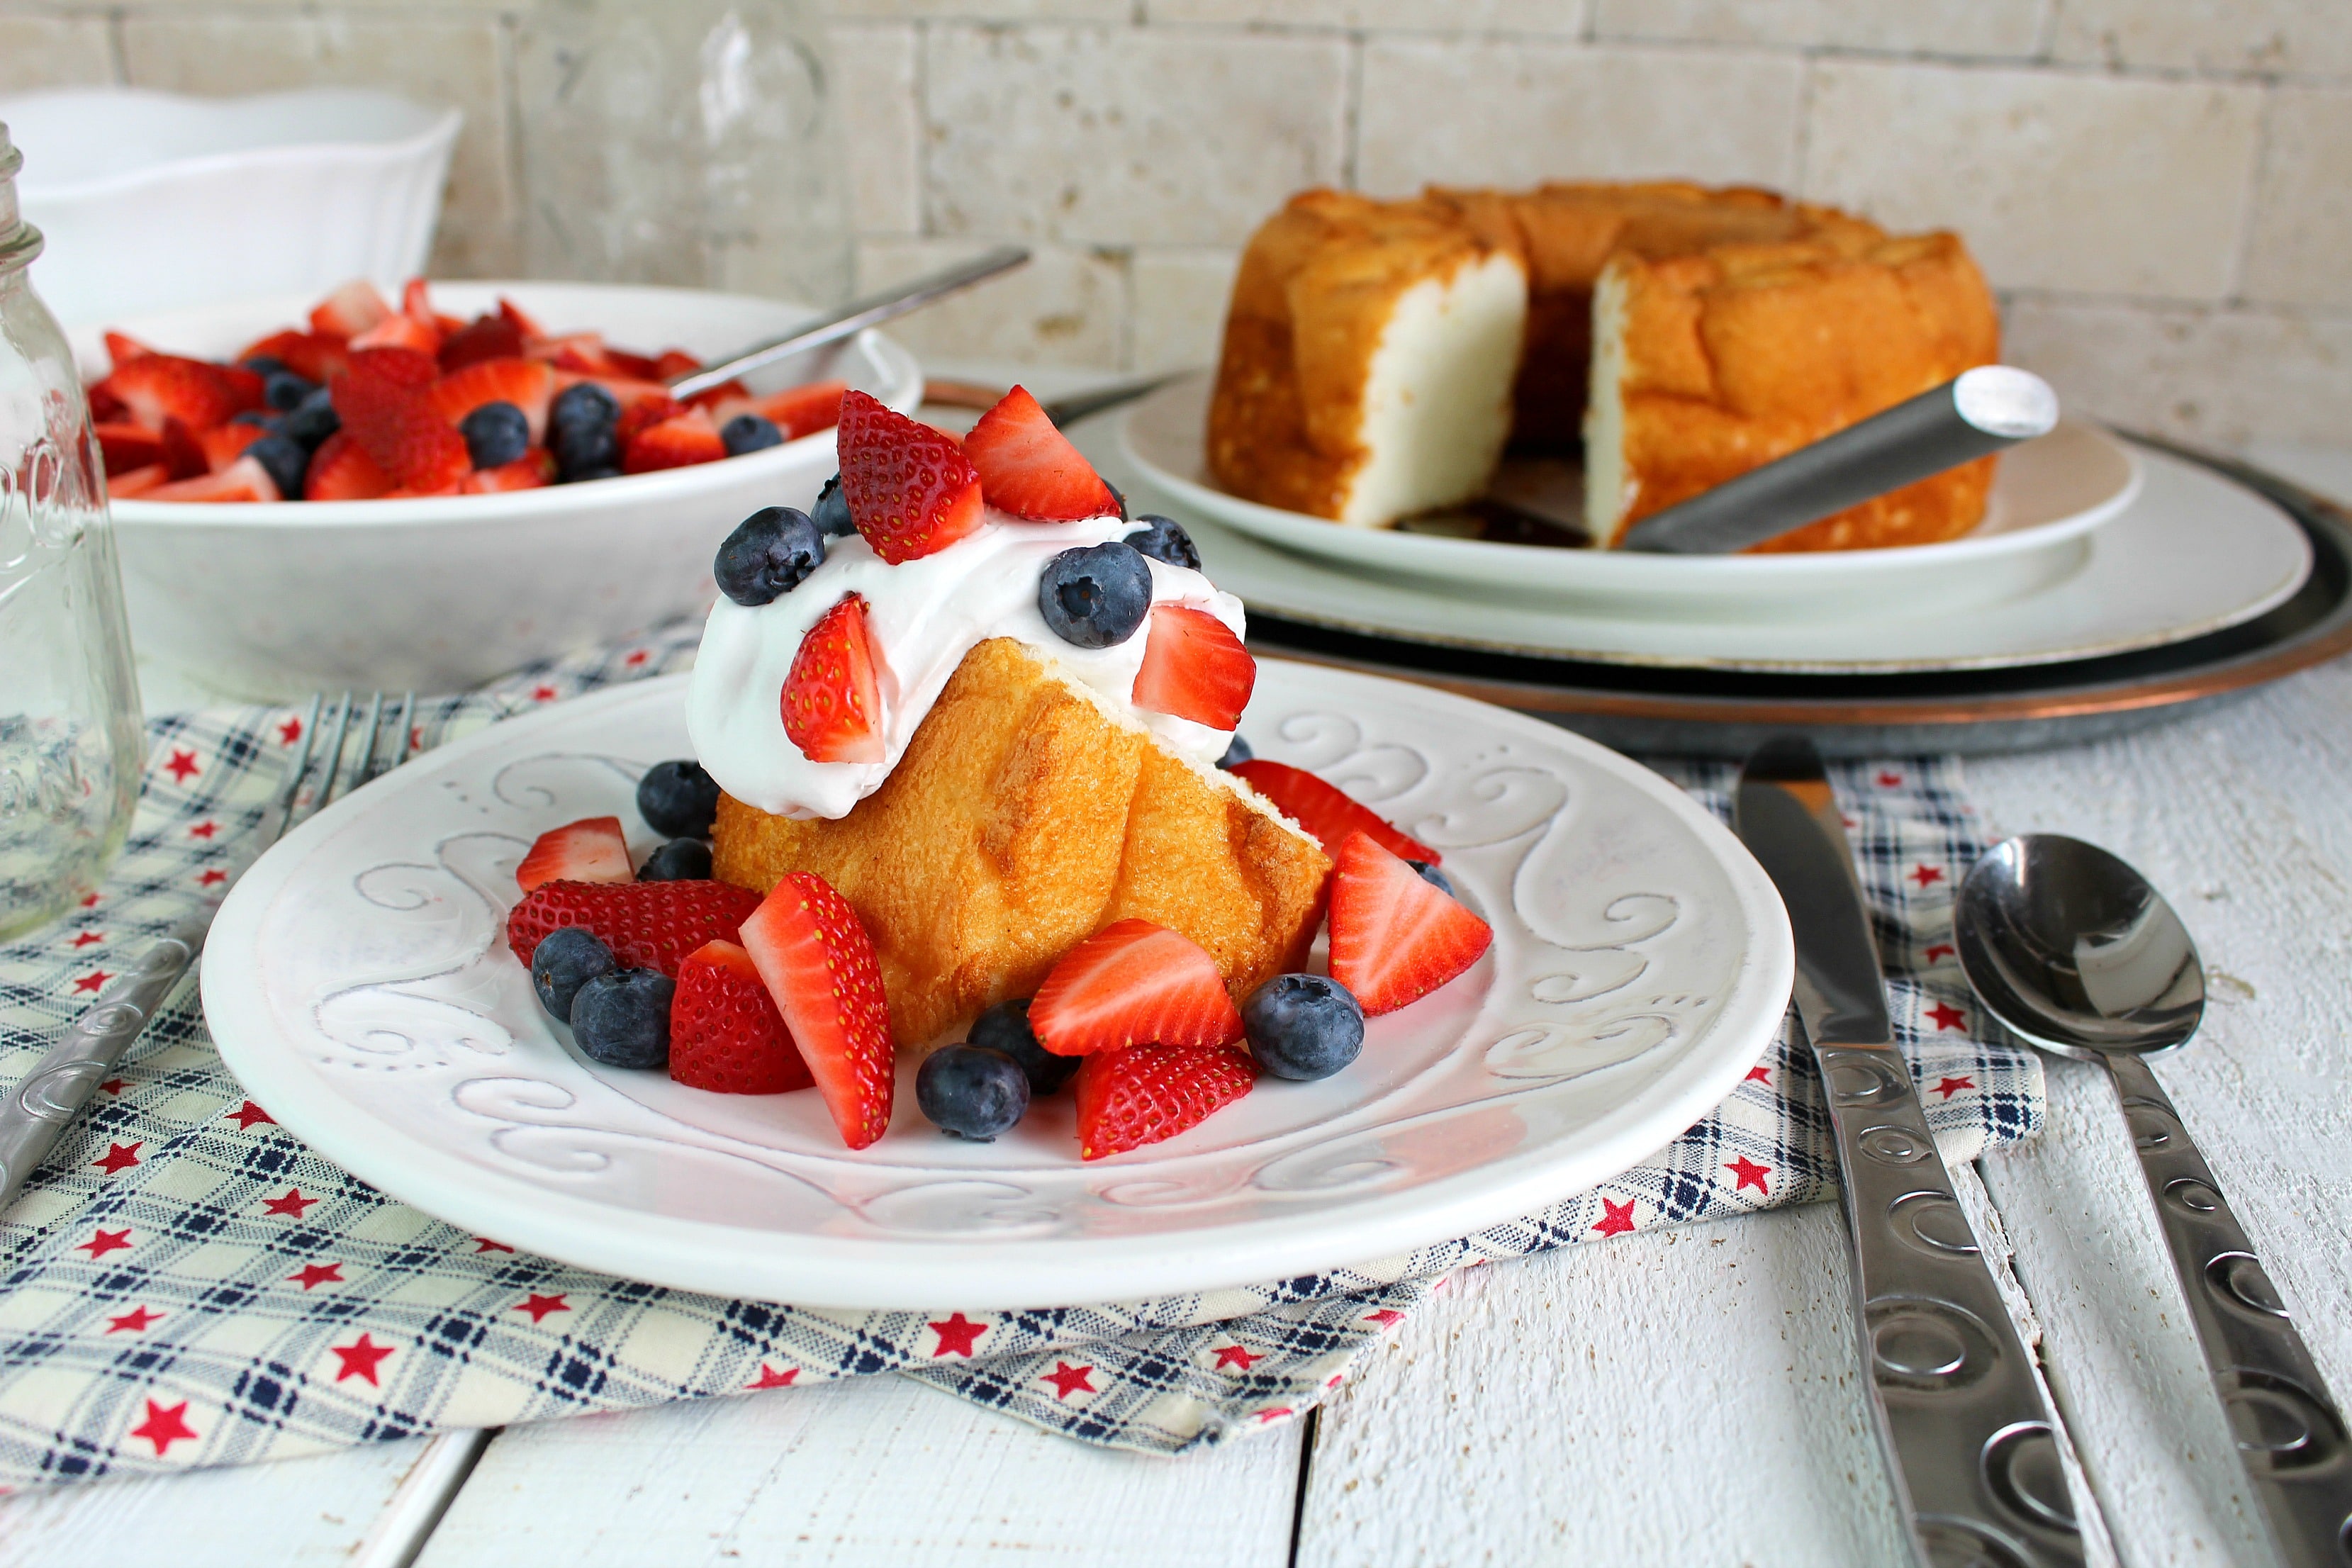 This light and sweet dessert is perfect for a 4th of july party